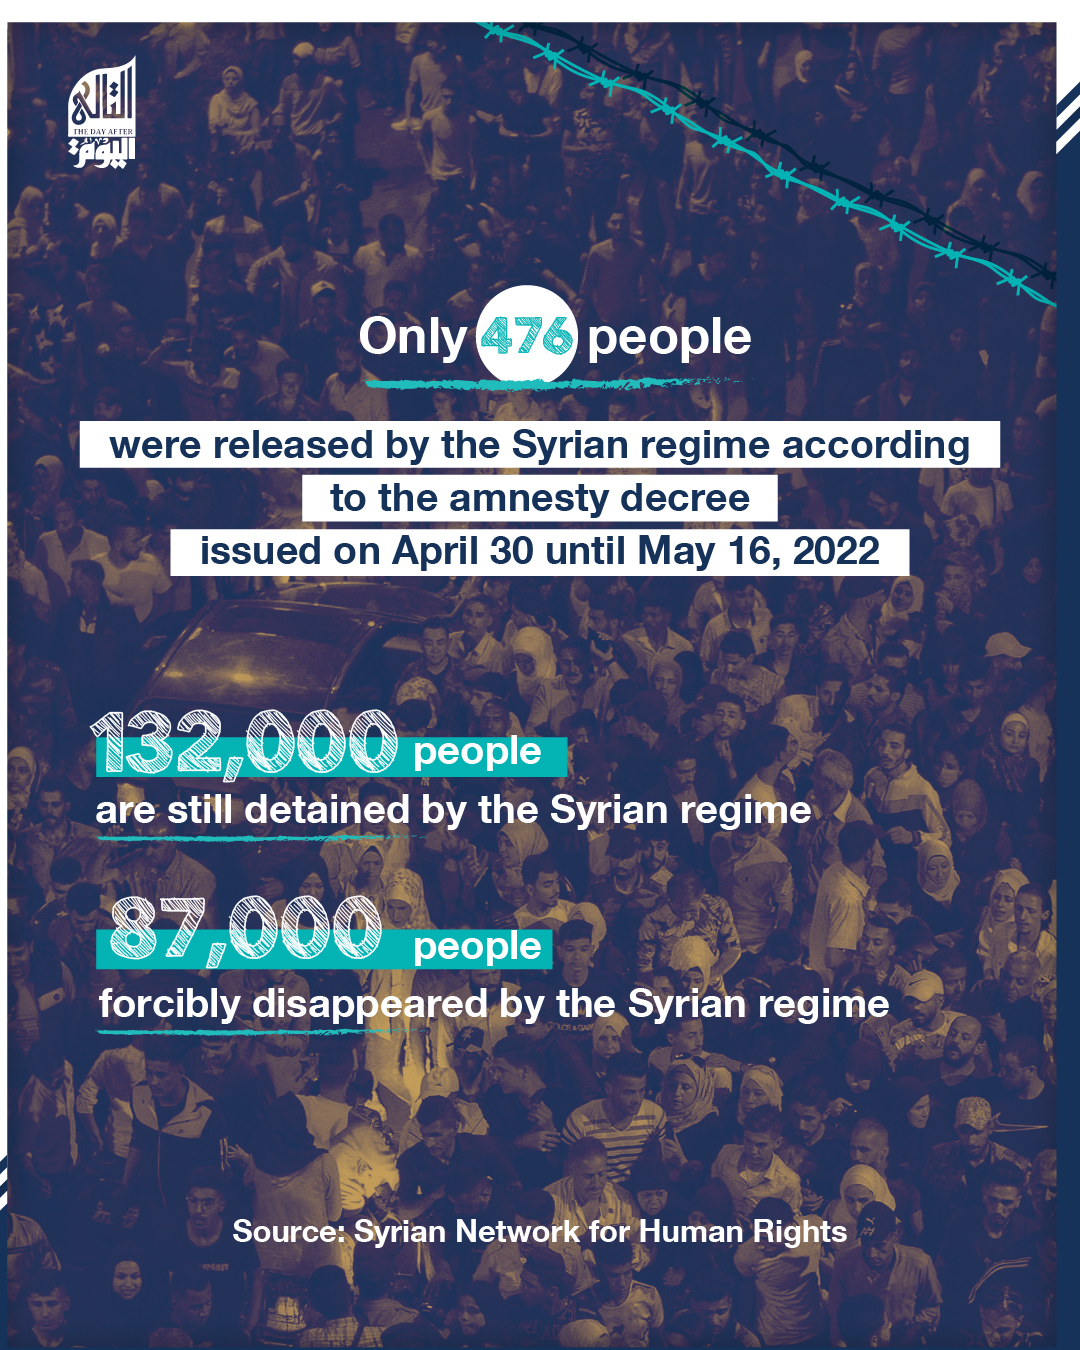 132,000 people are still detained by the Syrian regime